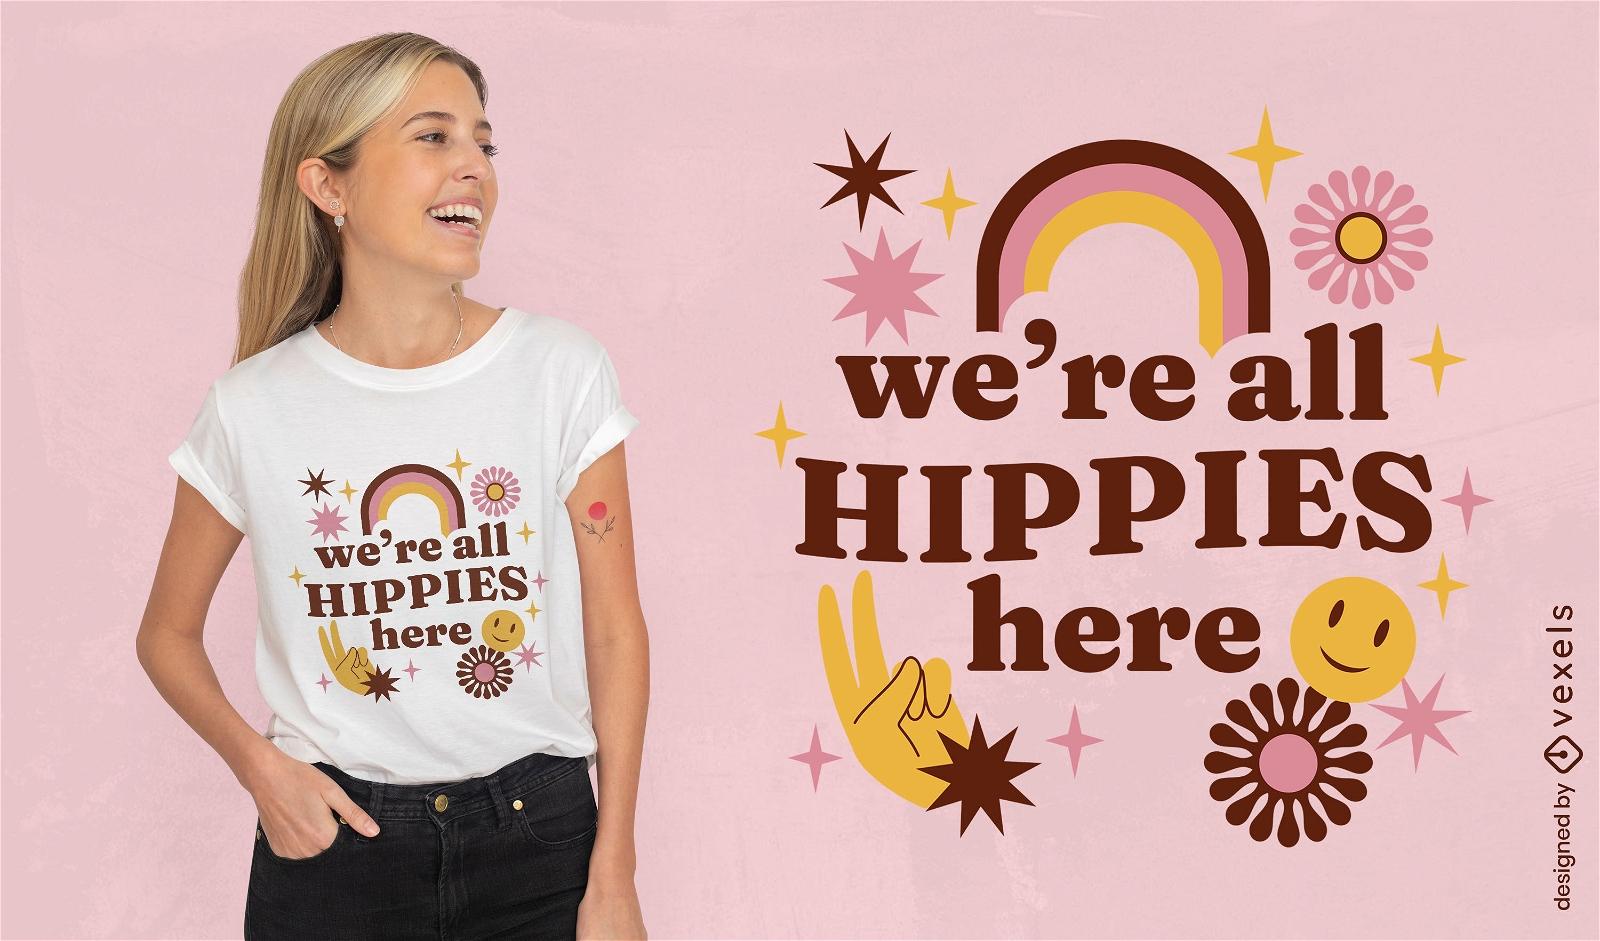 We're all hippies here lettering t-shirt design